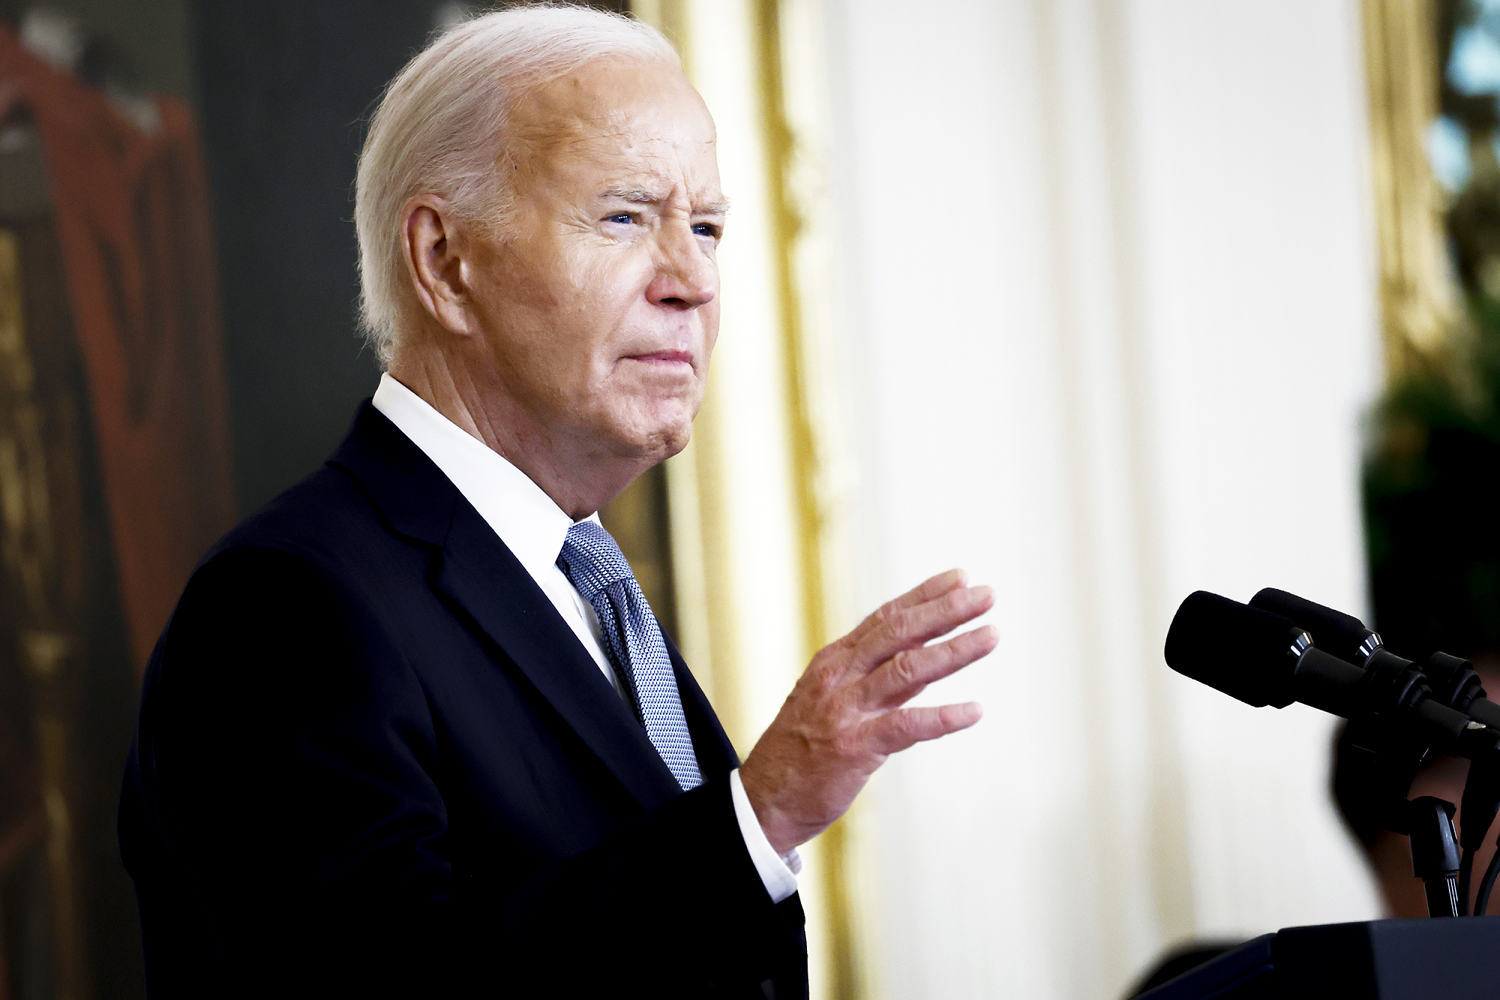 Biden has stumbled on a way out of his post-debate mess